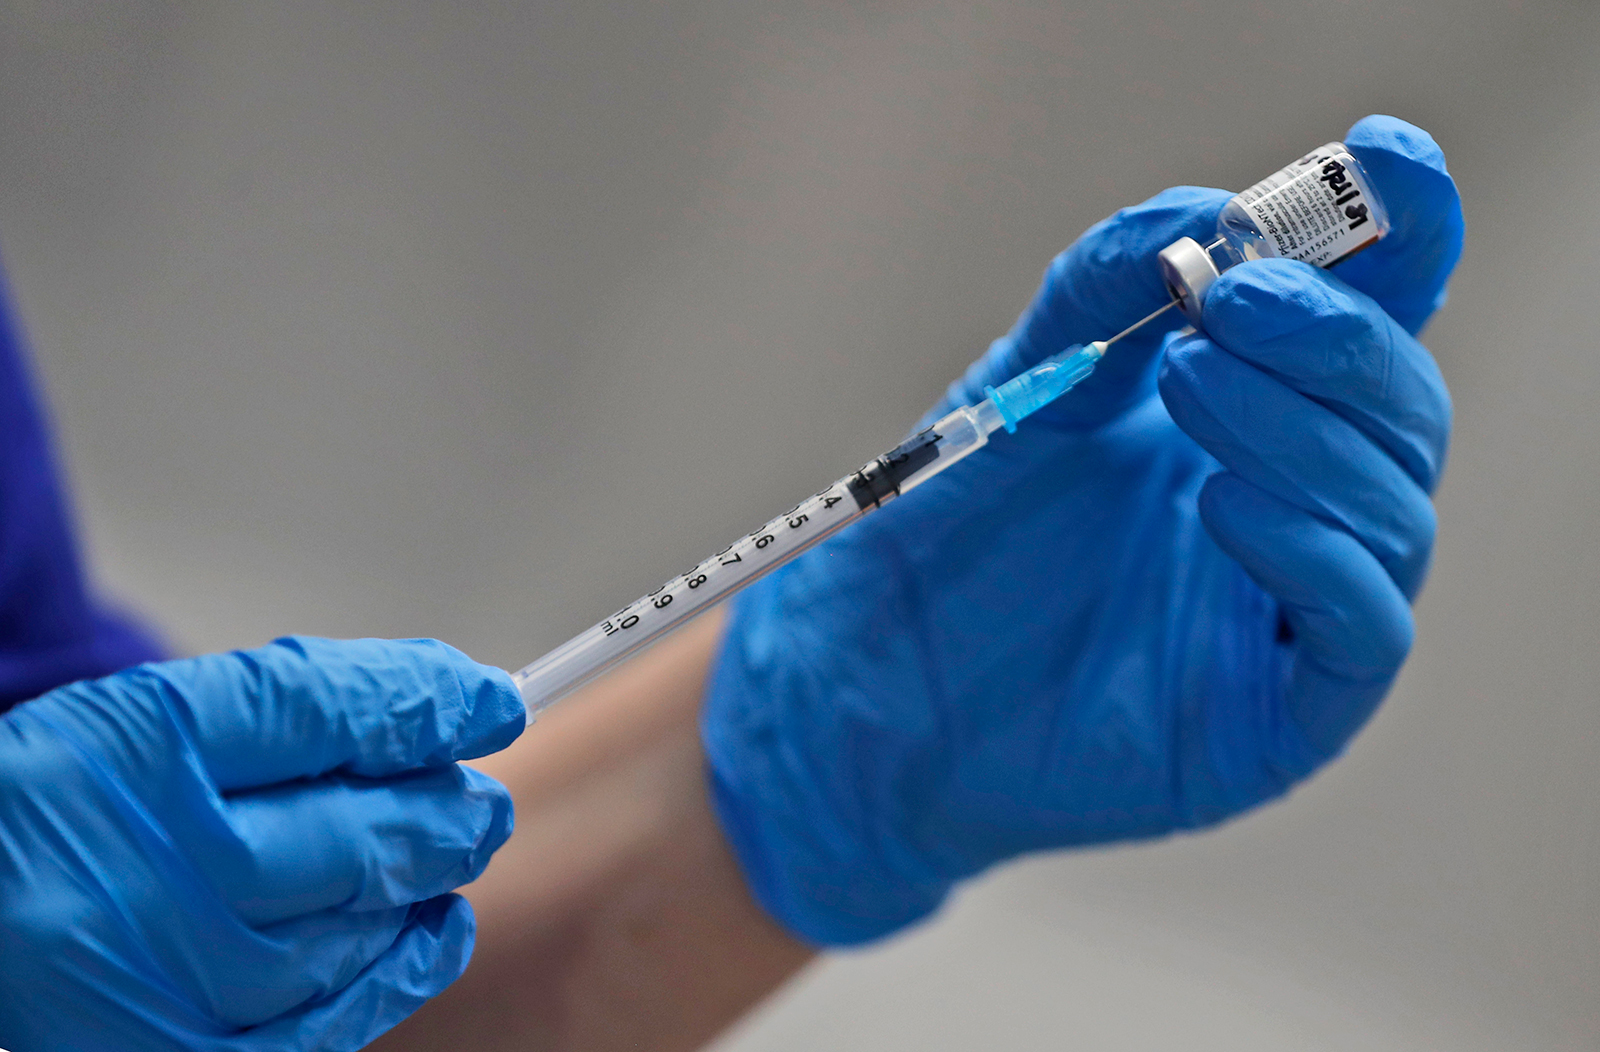 “We do not recommend mixing Covid-19 vaccines,” Public Health England chief says